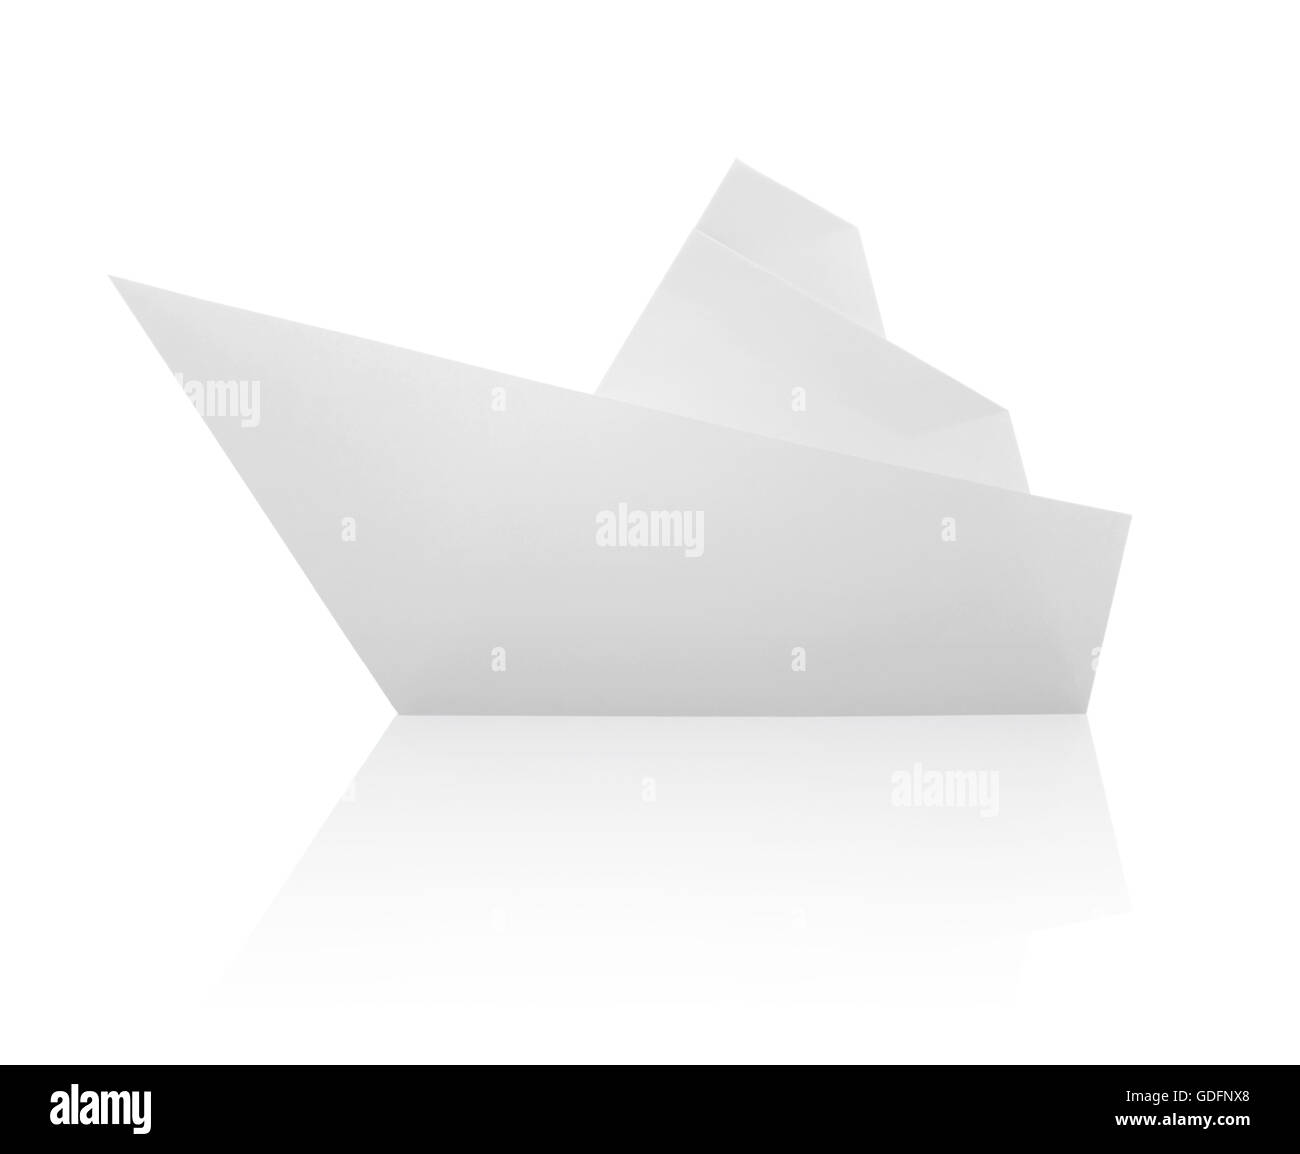 Origami Paper Ship Isolated on White Background Stock Photo